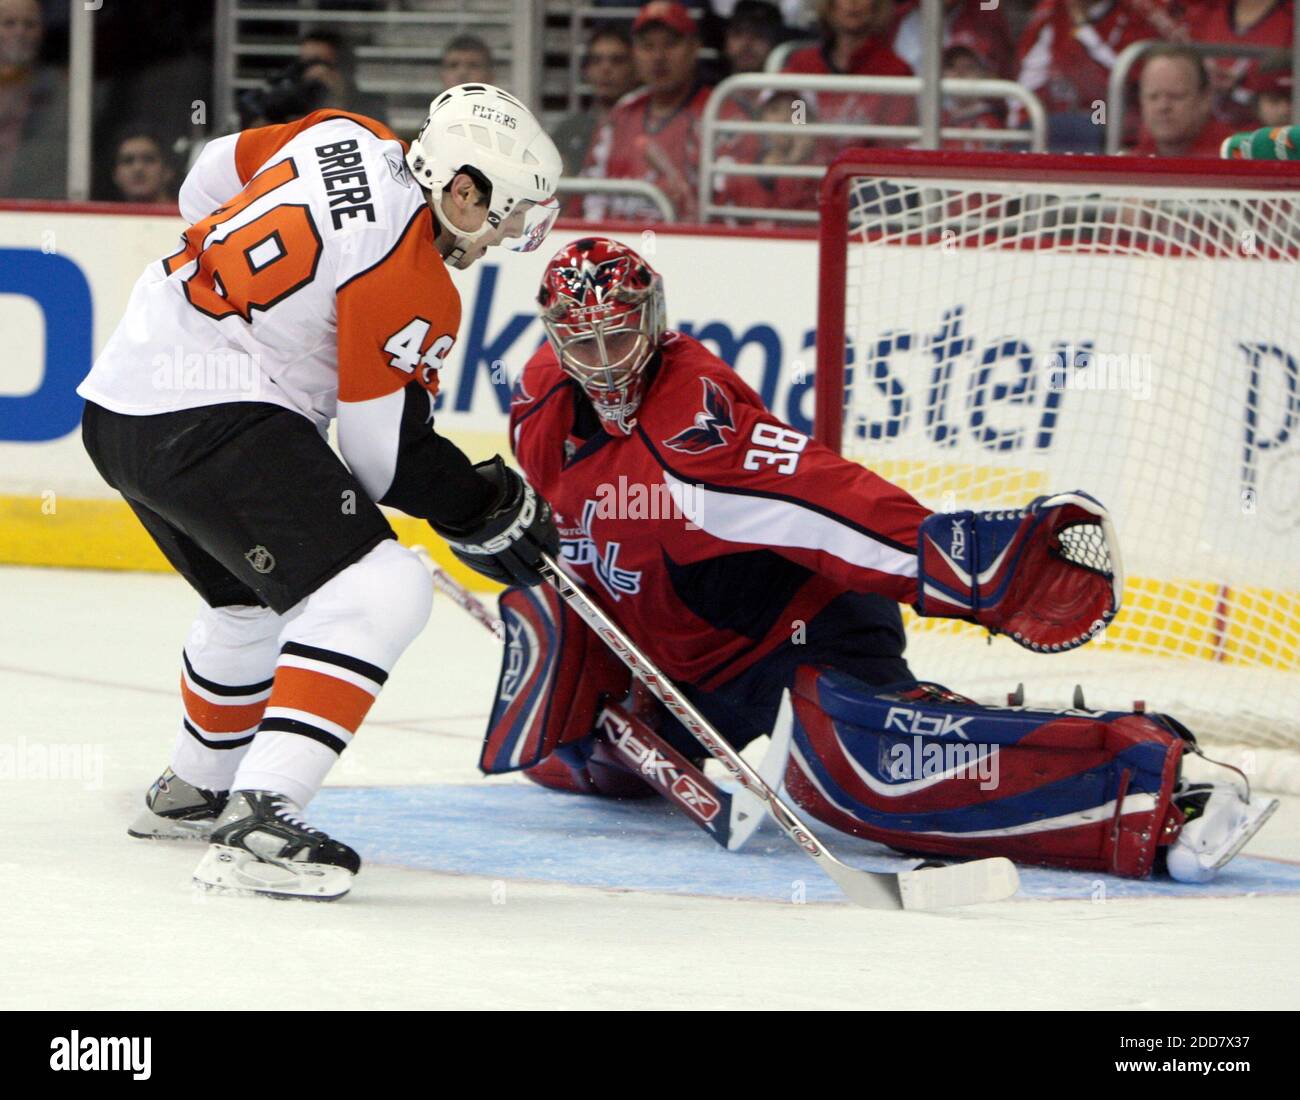 Washington Capitals' goalie Cristobal Huet (38) makes a save on a shot by the Philadelphia Flyers' Daniel Briere (48) in the first period of the Capitals' 3-2 victory in the Stanley Cup playoff game at the Verizon Center in Washington, DC, USA on April 19, 2008 . Photo by George Bridges/MCT/Cameleon/ABACAPRESS.COM Stock Photo